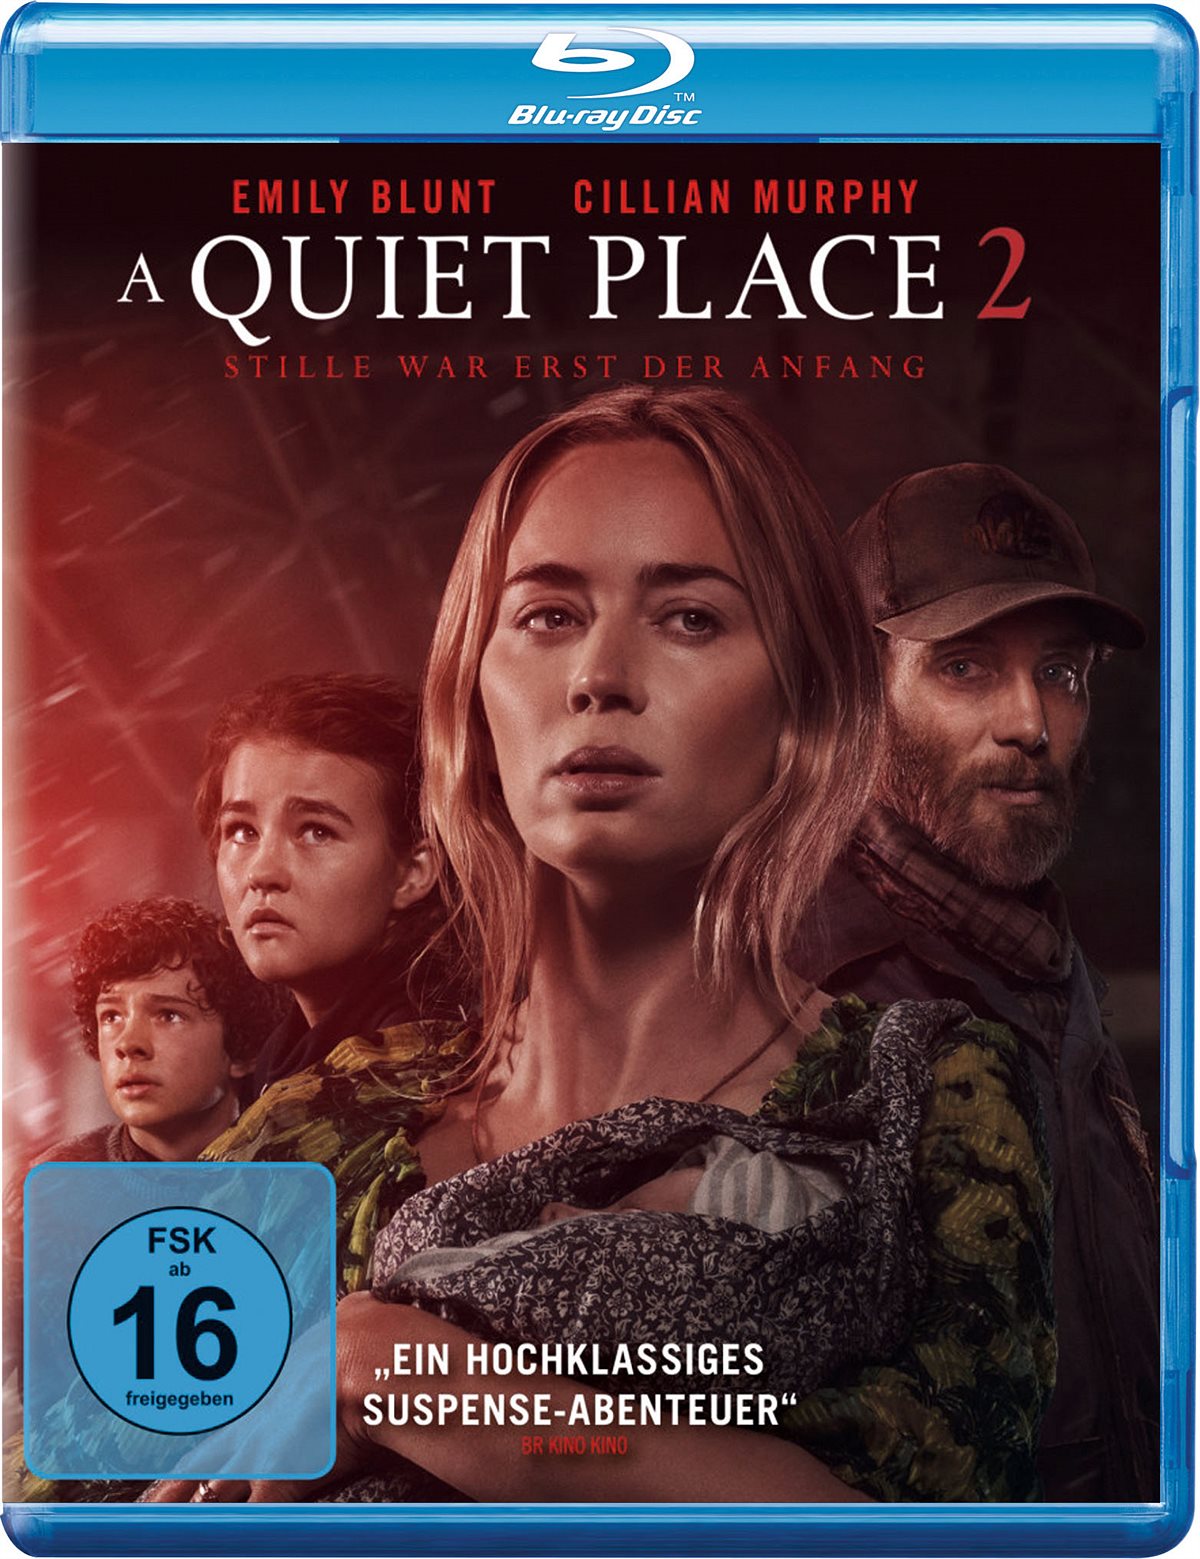 LIBRO_A Quiet Place 2, Blu-Ray_€ 14,99